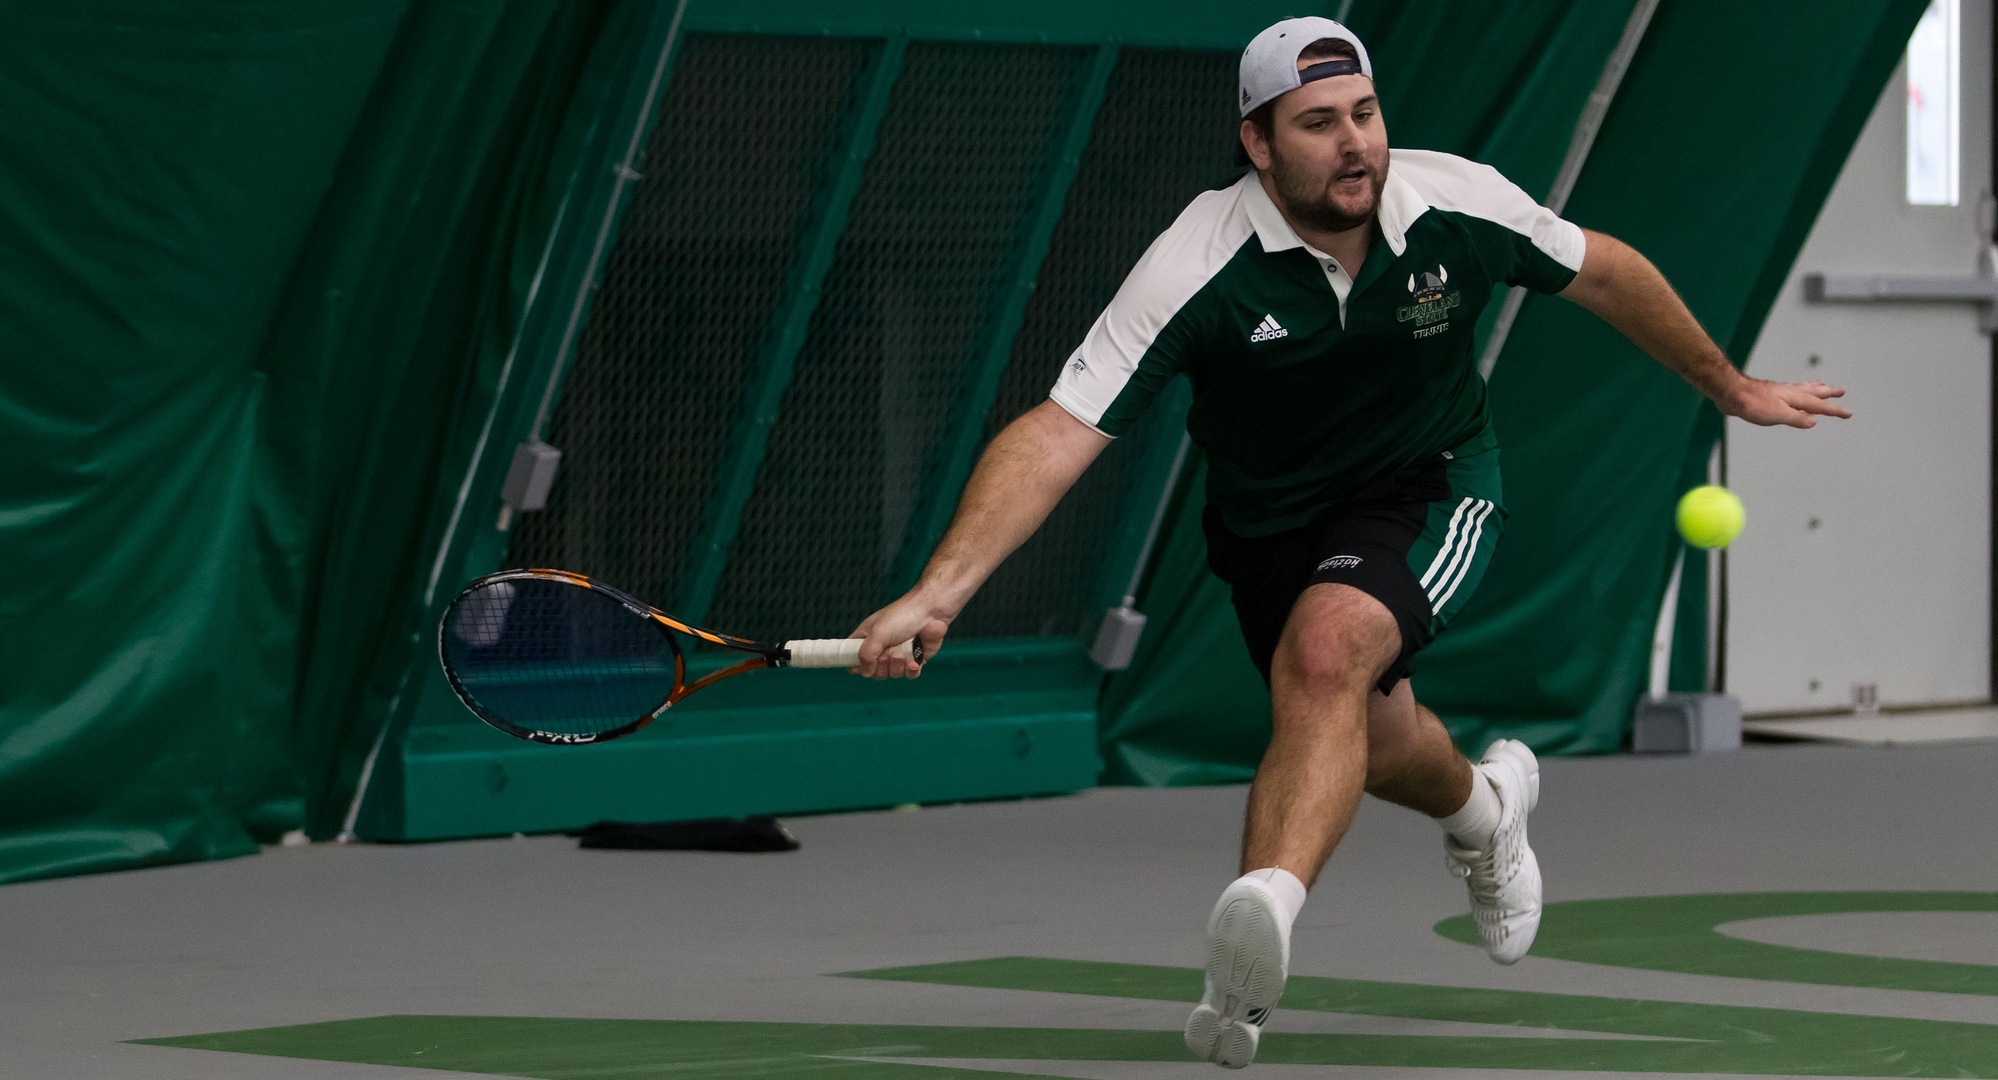 Vikings Begin Three-Match Roadswing At Youngstown State